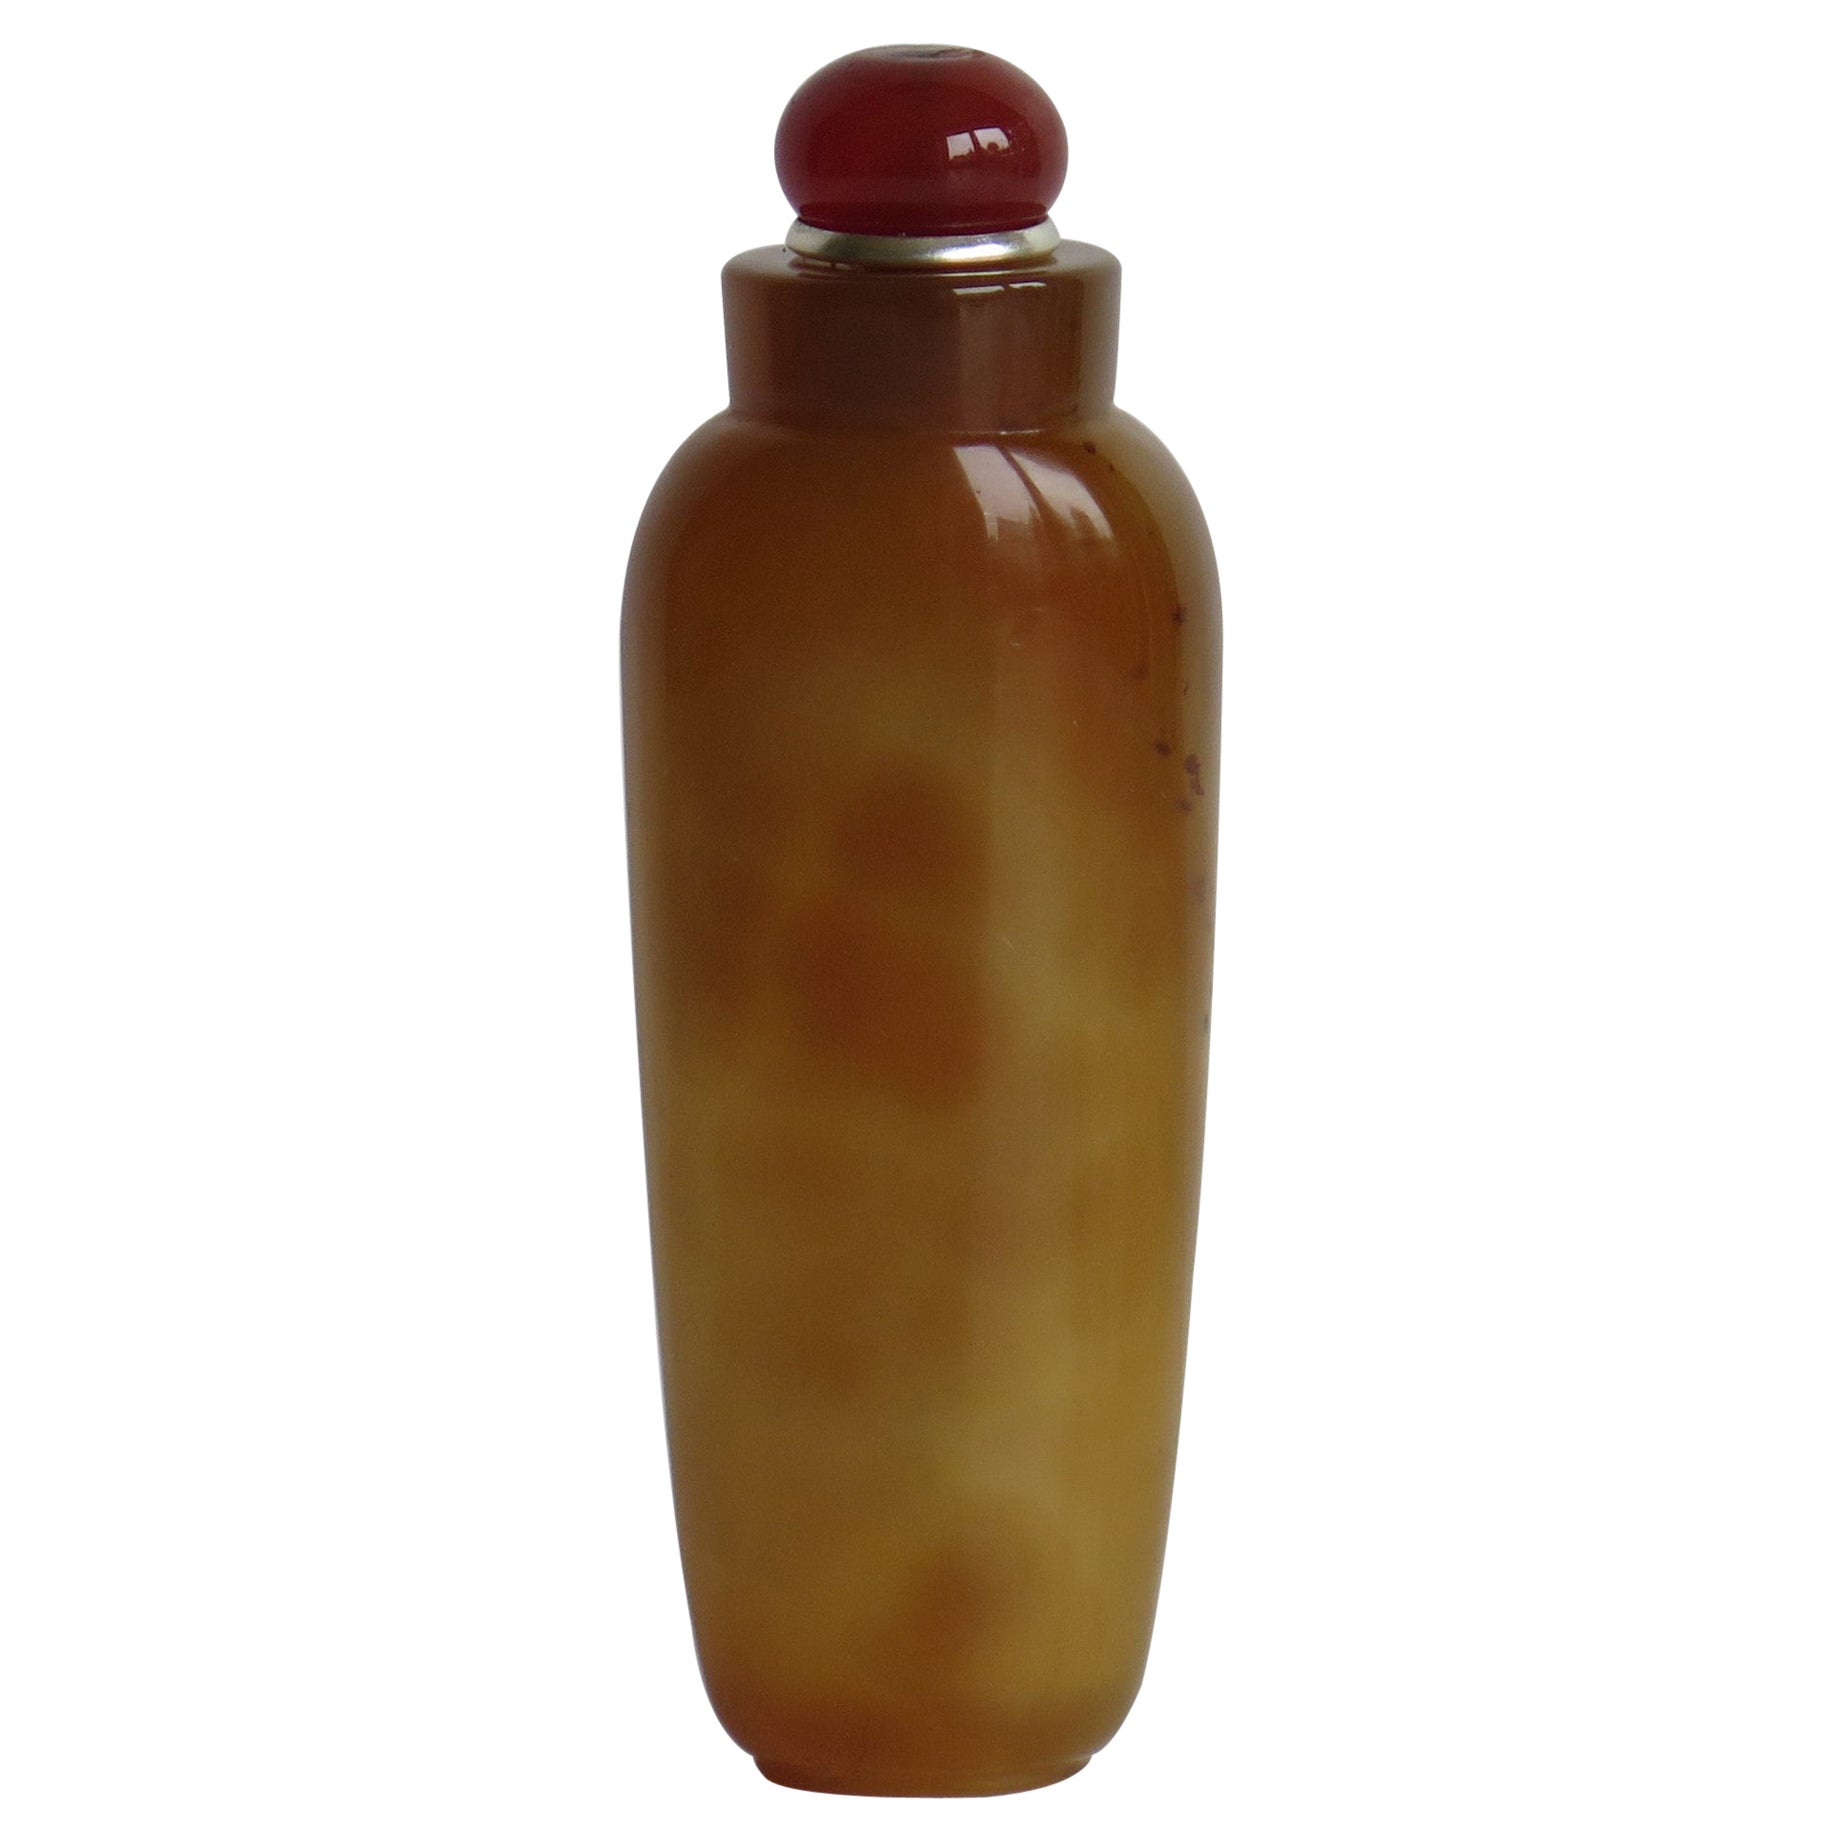 Chinese Natural Agate Stone Snuff Bottle Hand Carved with Spoon Top, circa 1940